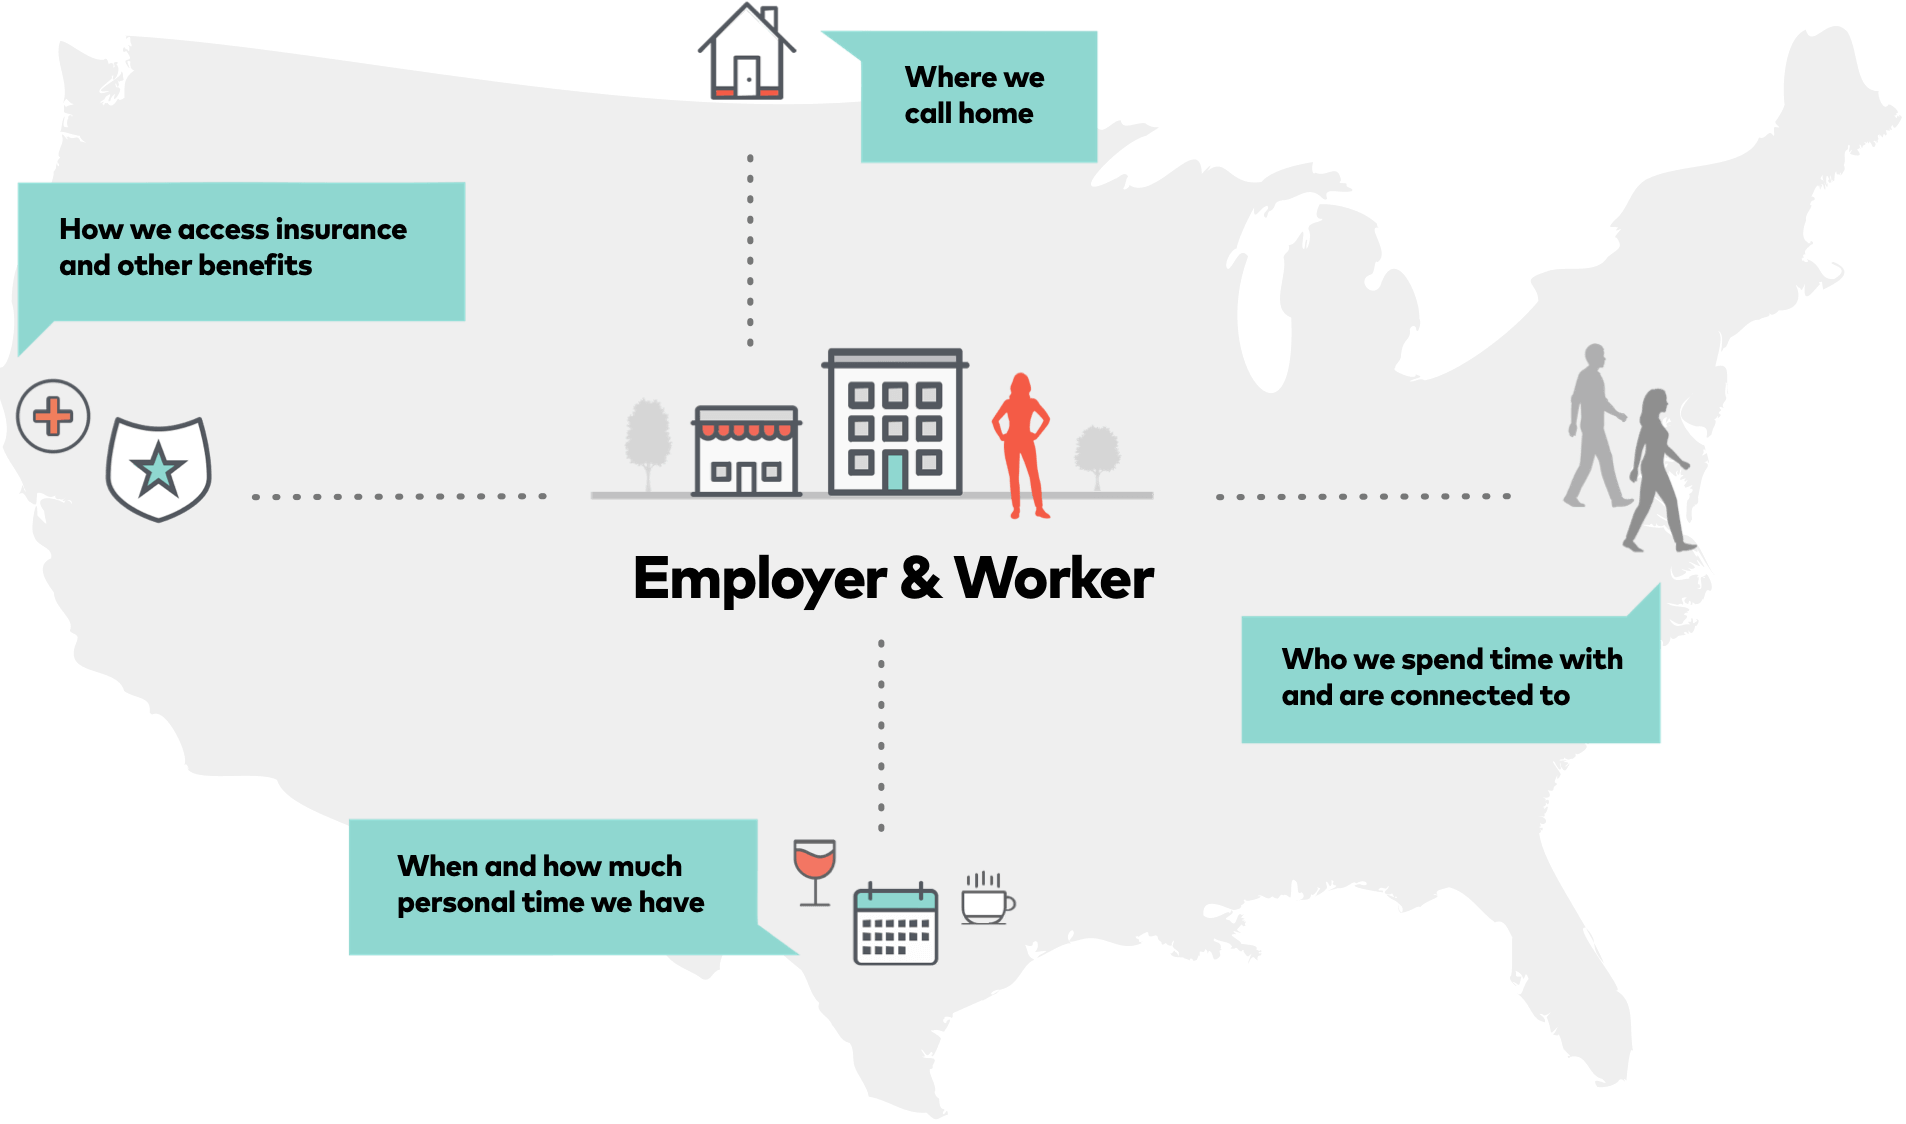 Map of the U.S. with employer and worker at the center